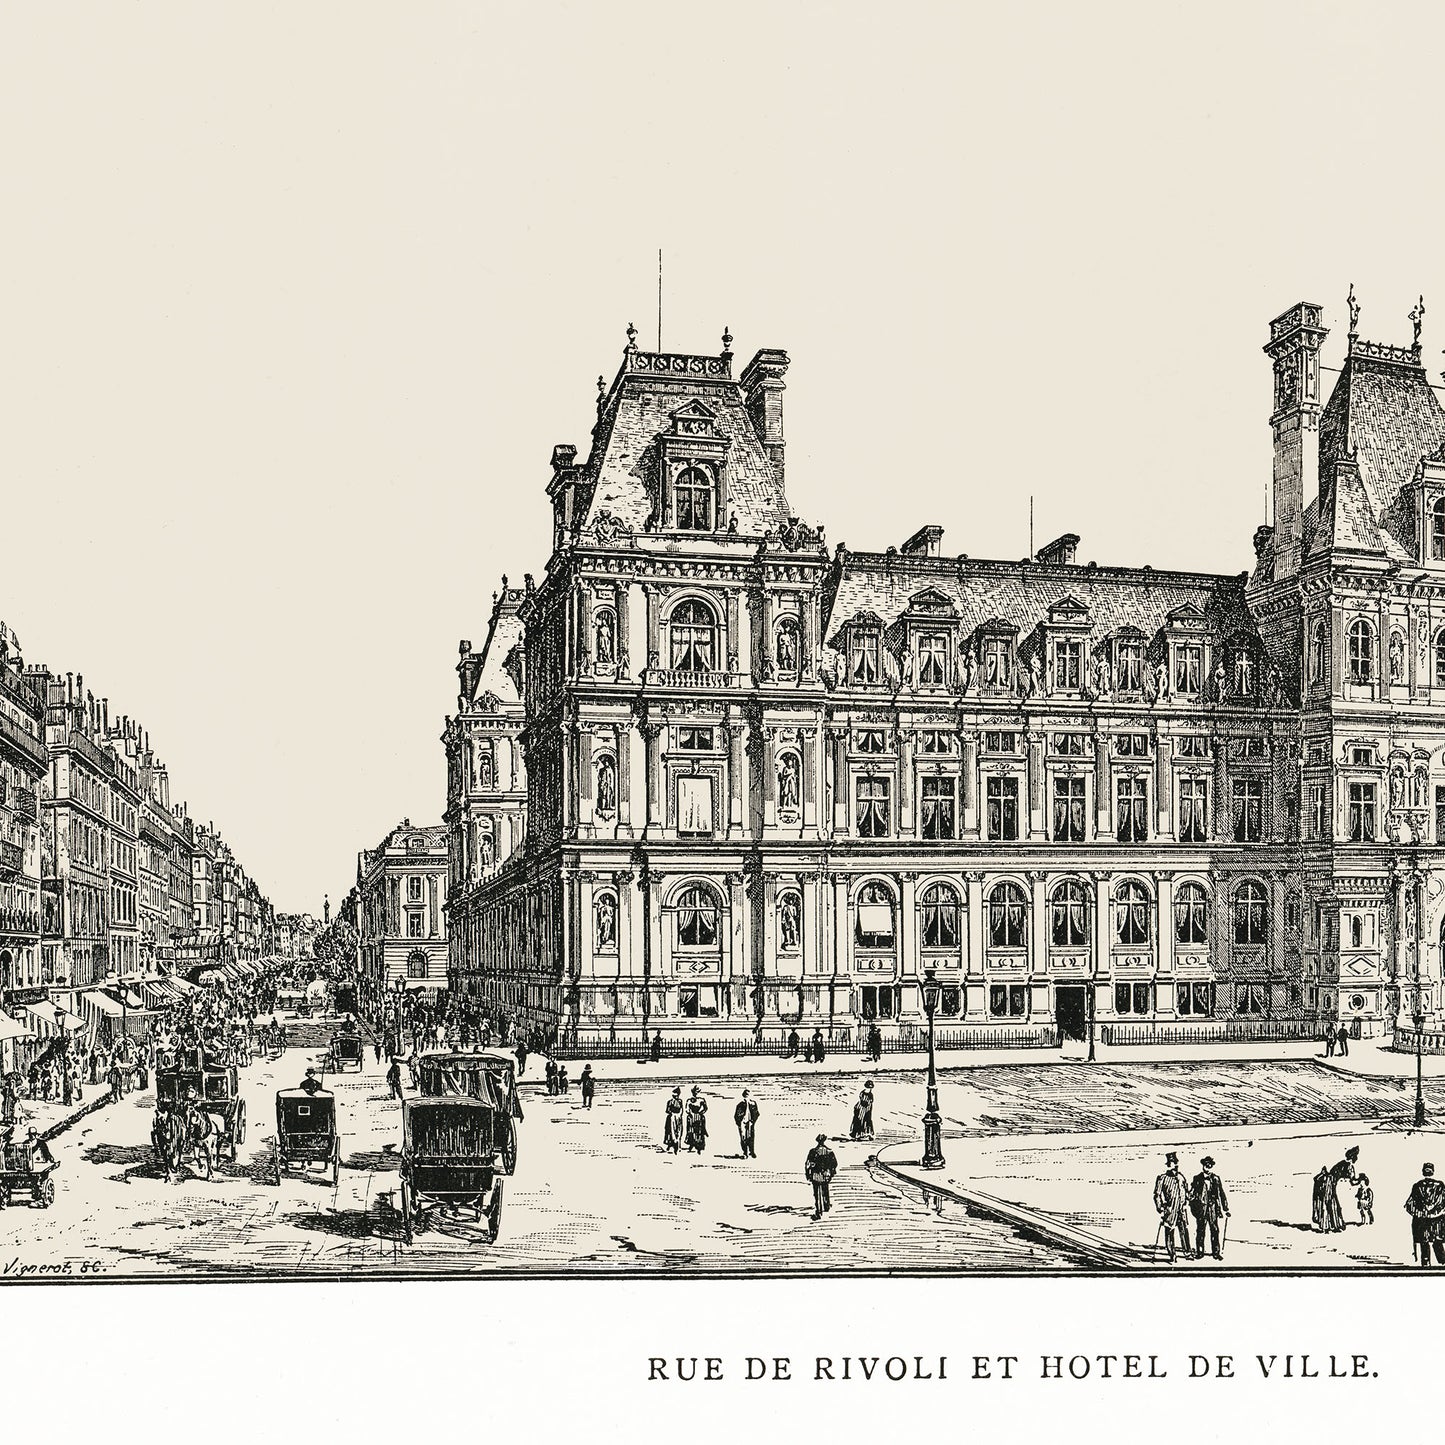 Paris City Hall poster reprint of a 1889 engraving by Auguste Vitu